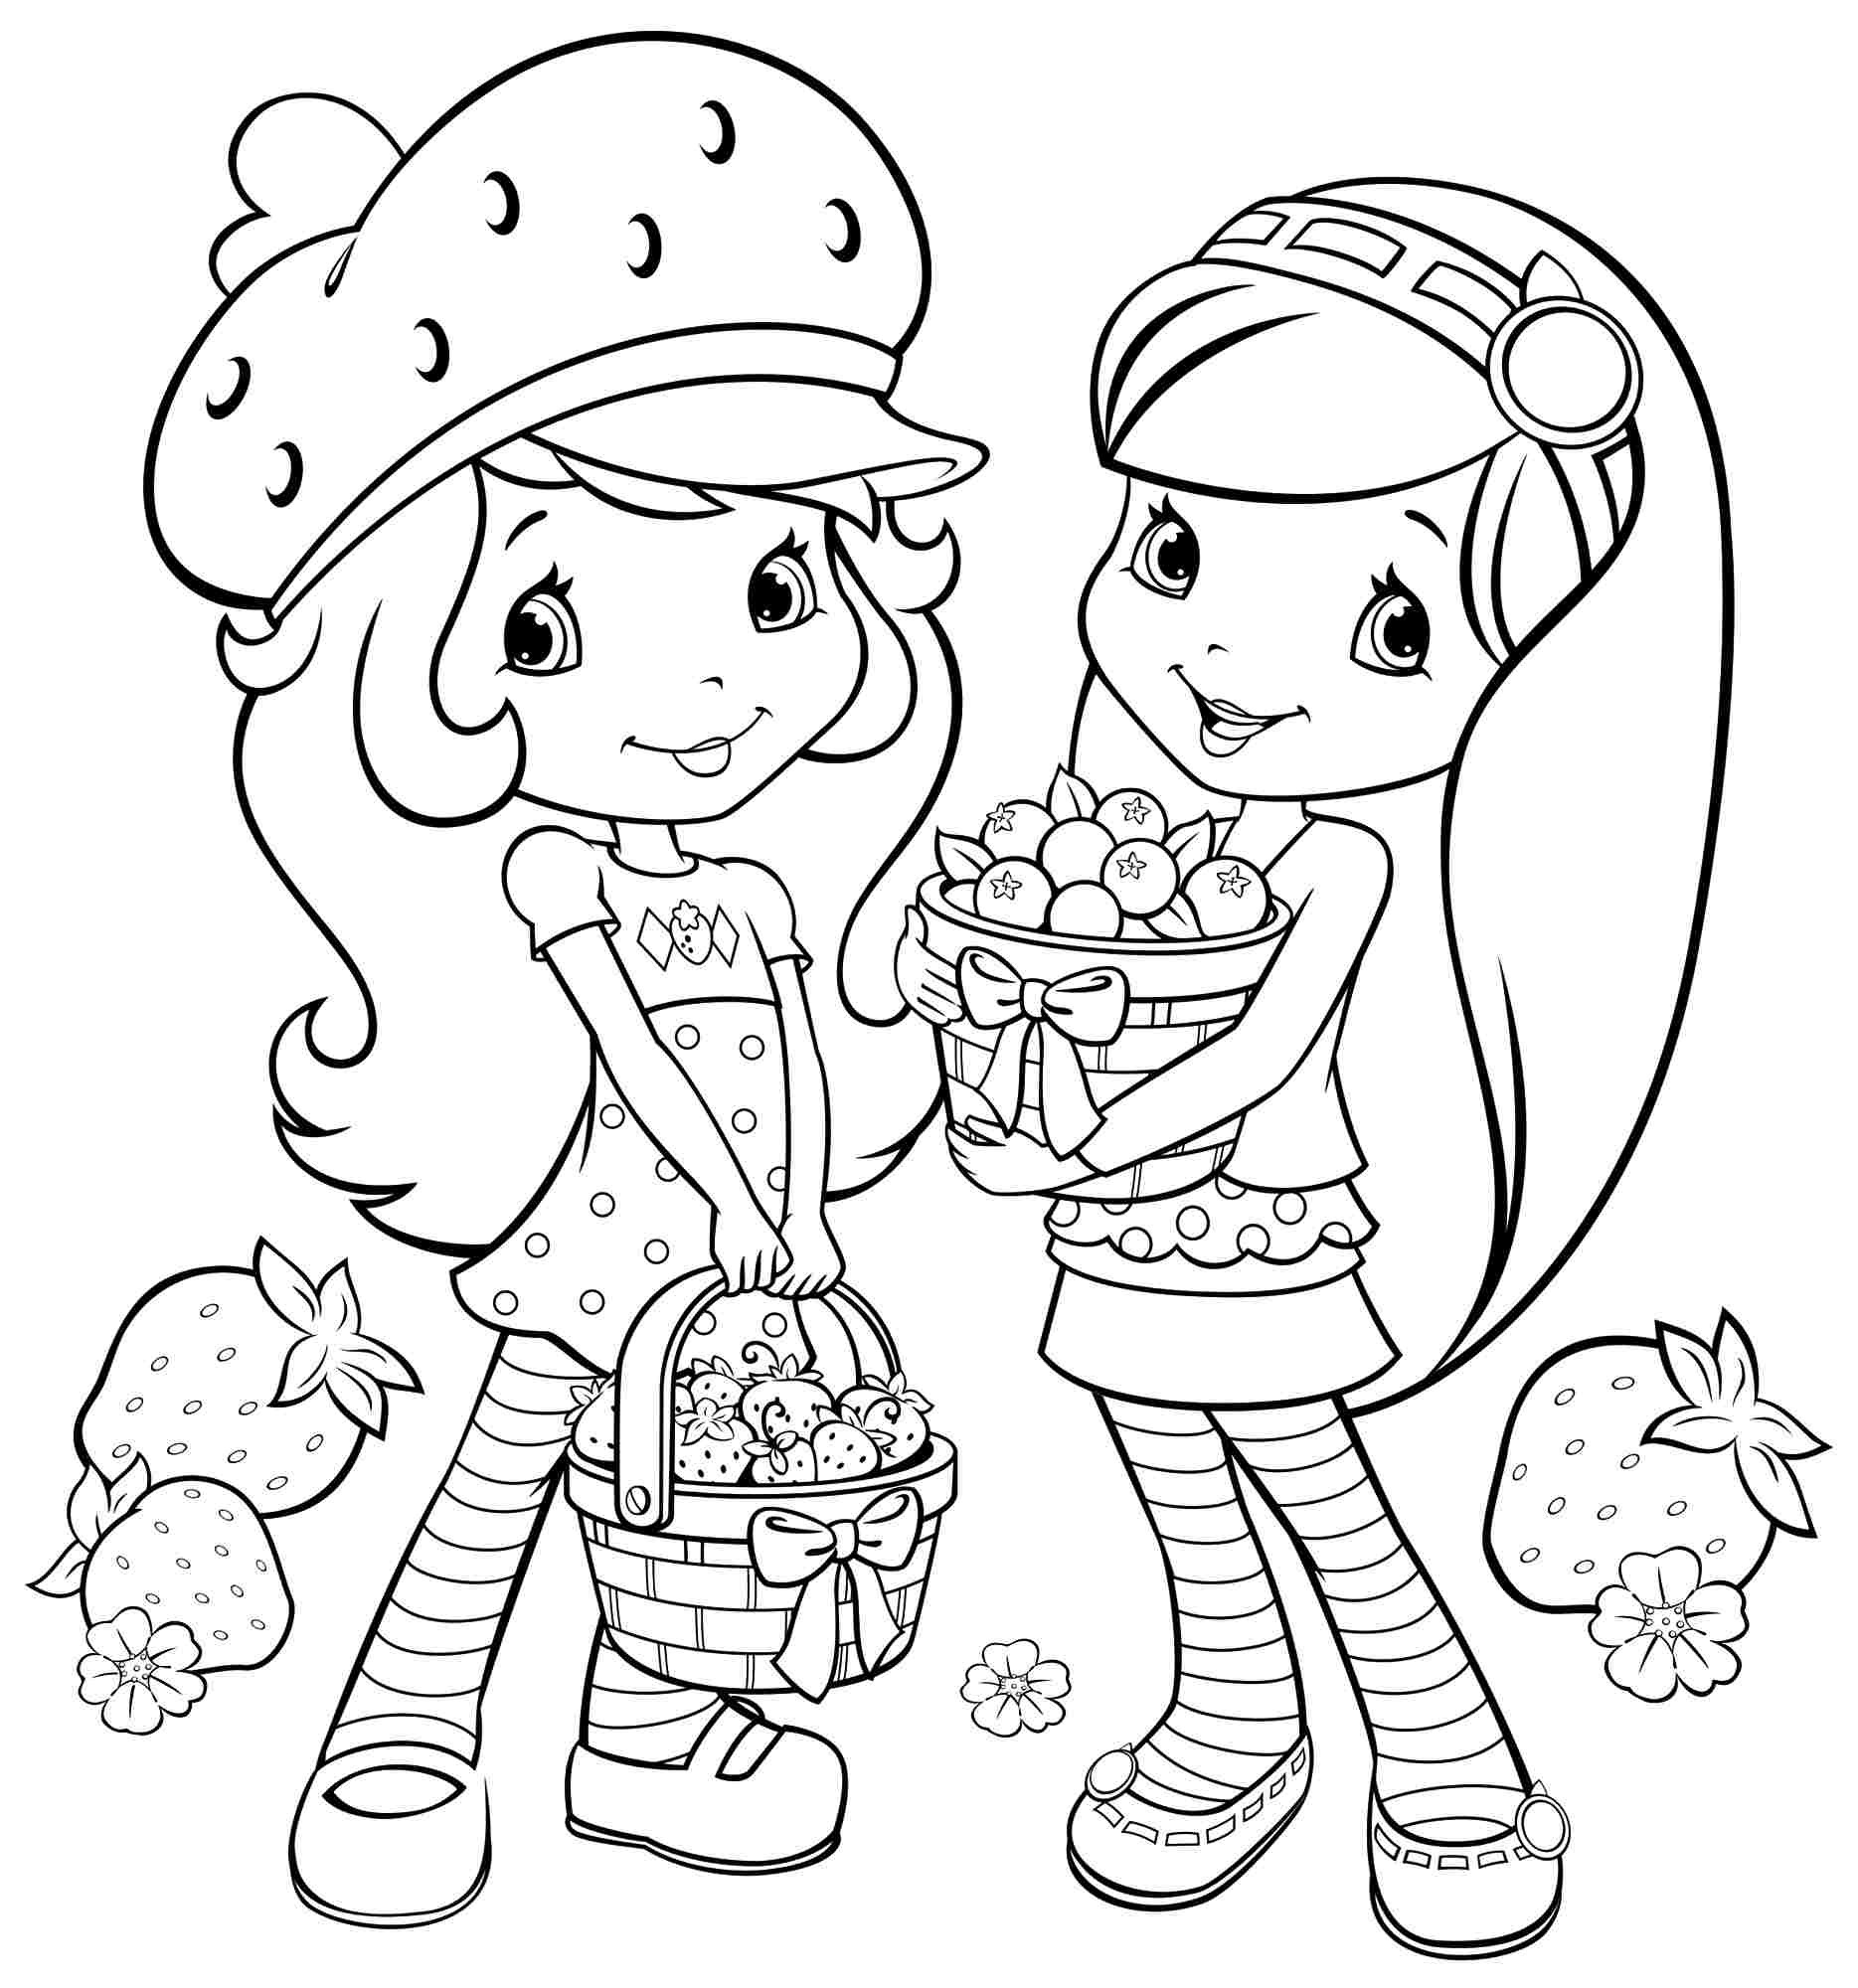 Lego Friends Colouring Pages To Print At Getcolorings.com | Free